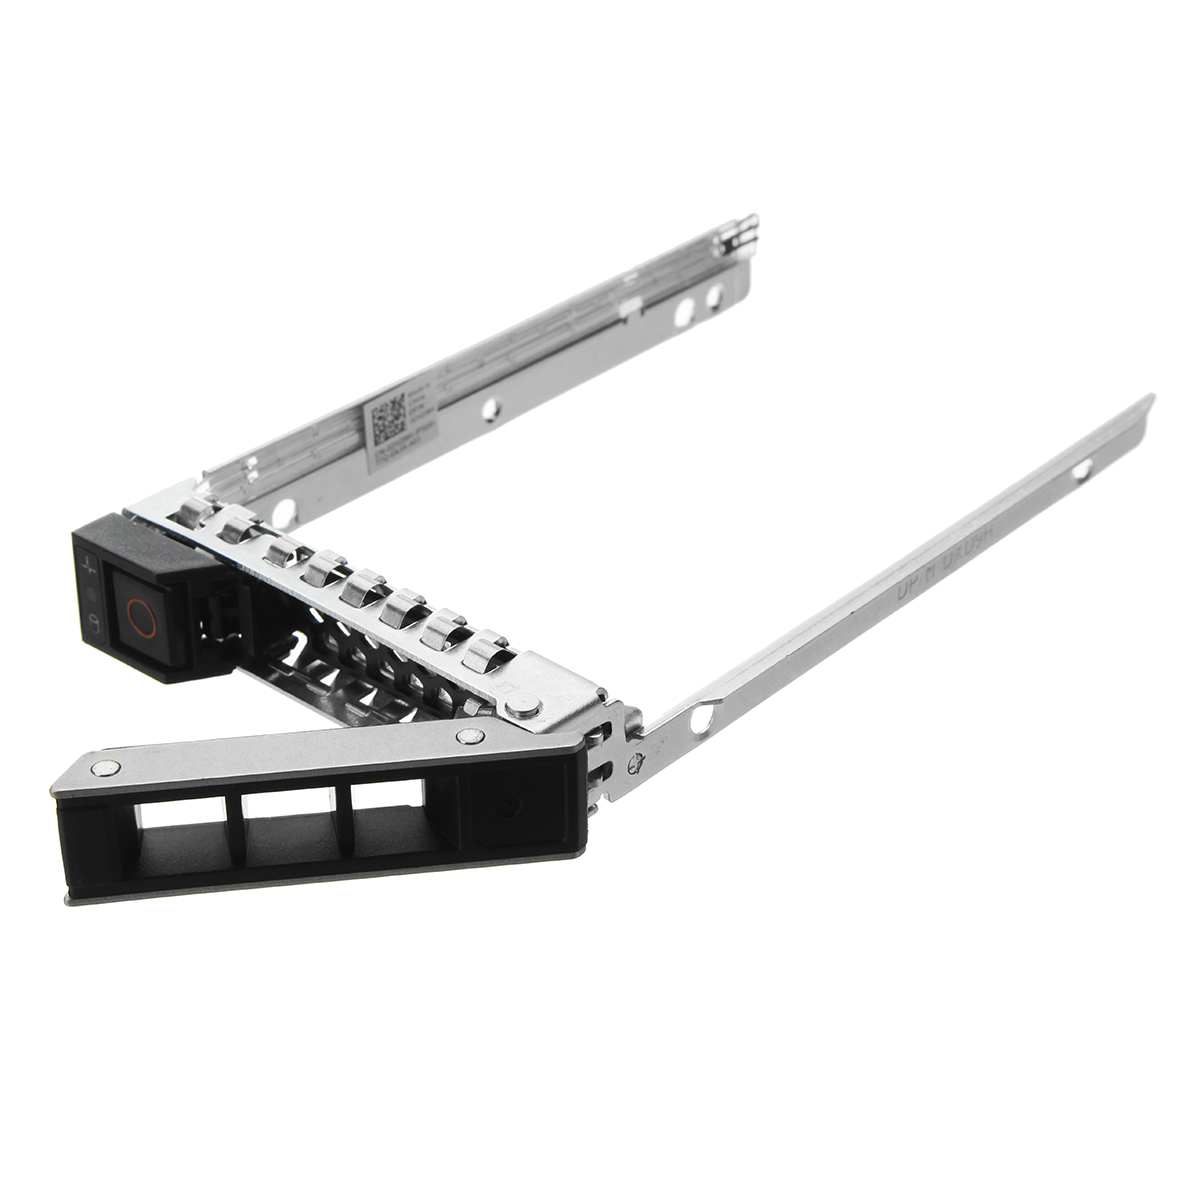 

2.5'' HDD Tray Caddy for Dell DXD9H Poweredge Server R640 R740 R740XD R7415 R940 Adapter